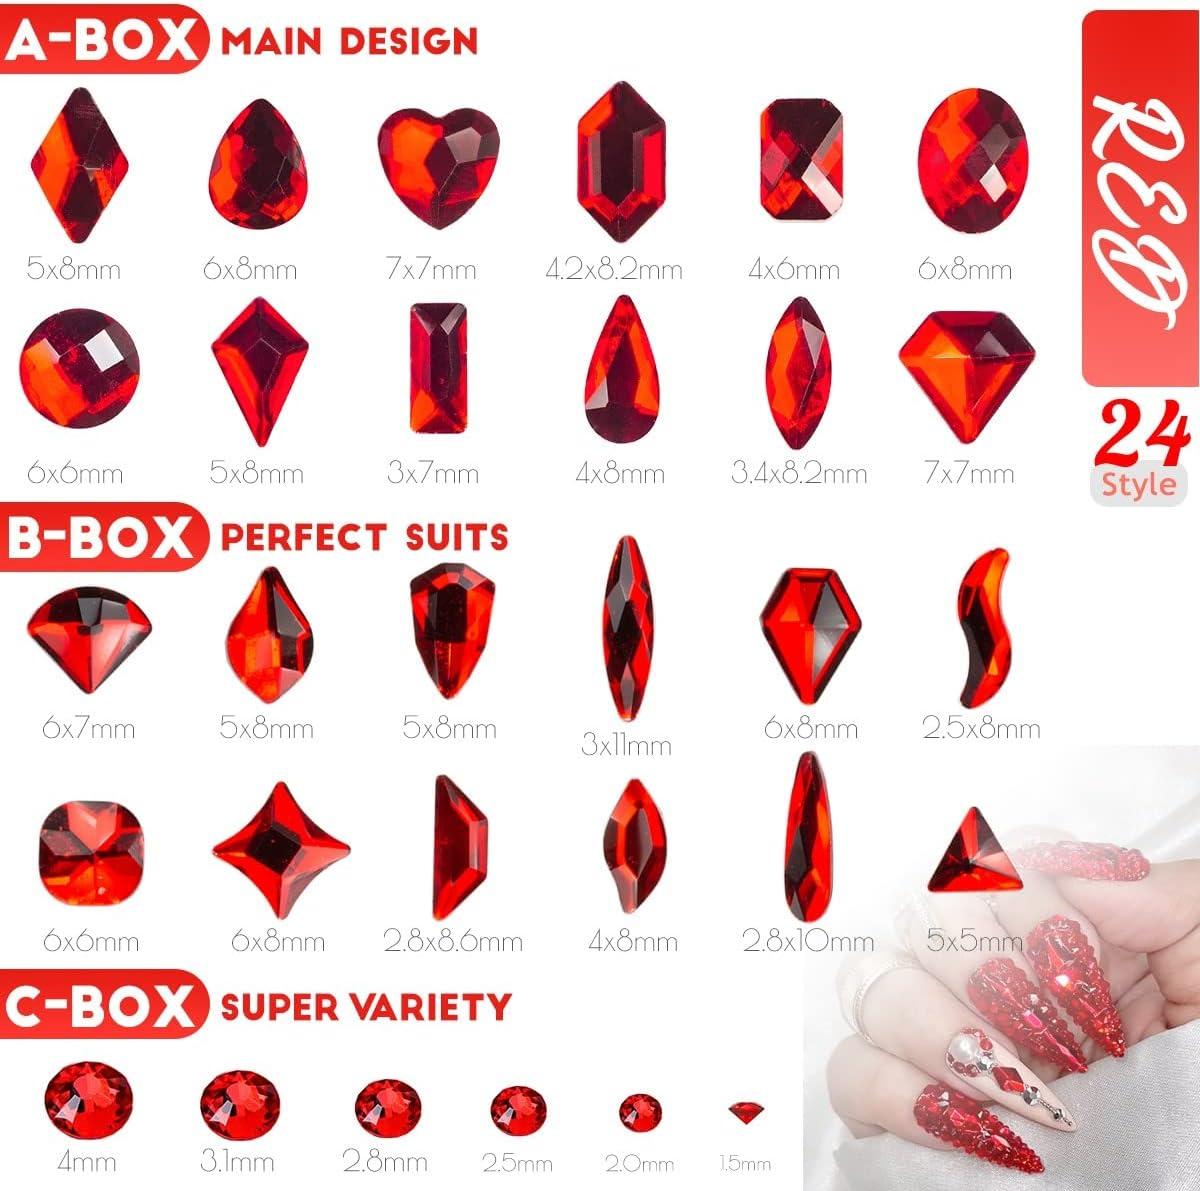 2750Pcs Red Nail Rhinestones 240 Multi-Shapes Ruby Red Rhinestones Big Gems  Nail Charms+2510 Siam Red Round Beads K9 Glass Stones Diamonds Jewels Nail  Art Flatback for Nails Face Eyes Makeup Crafts